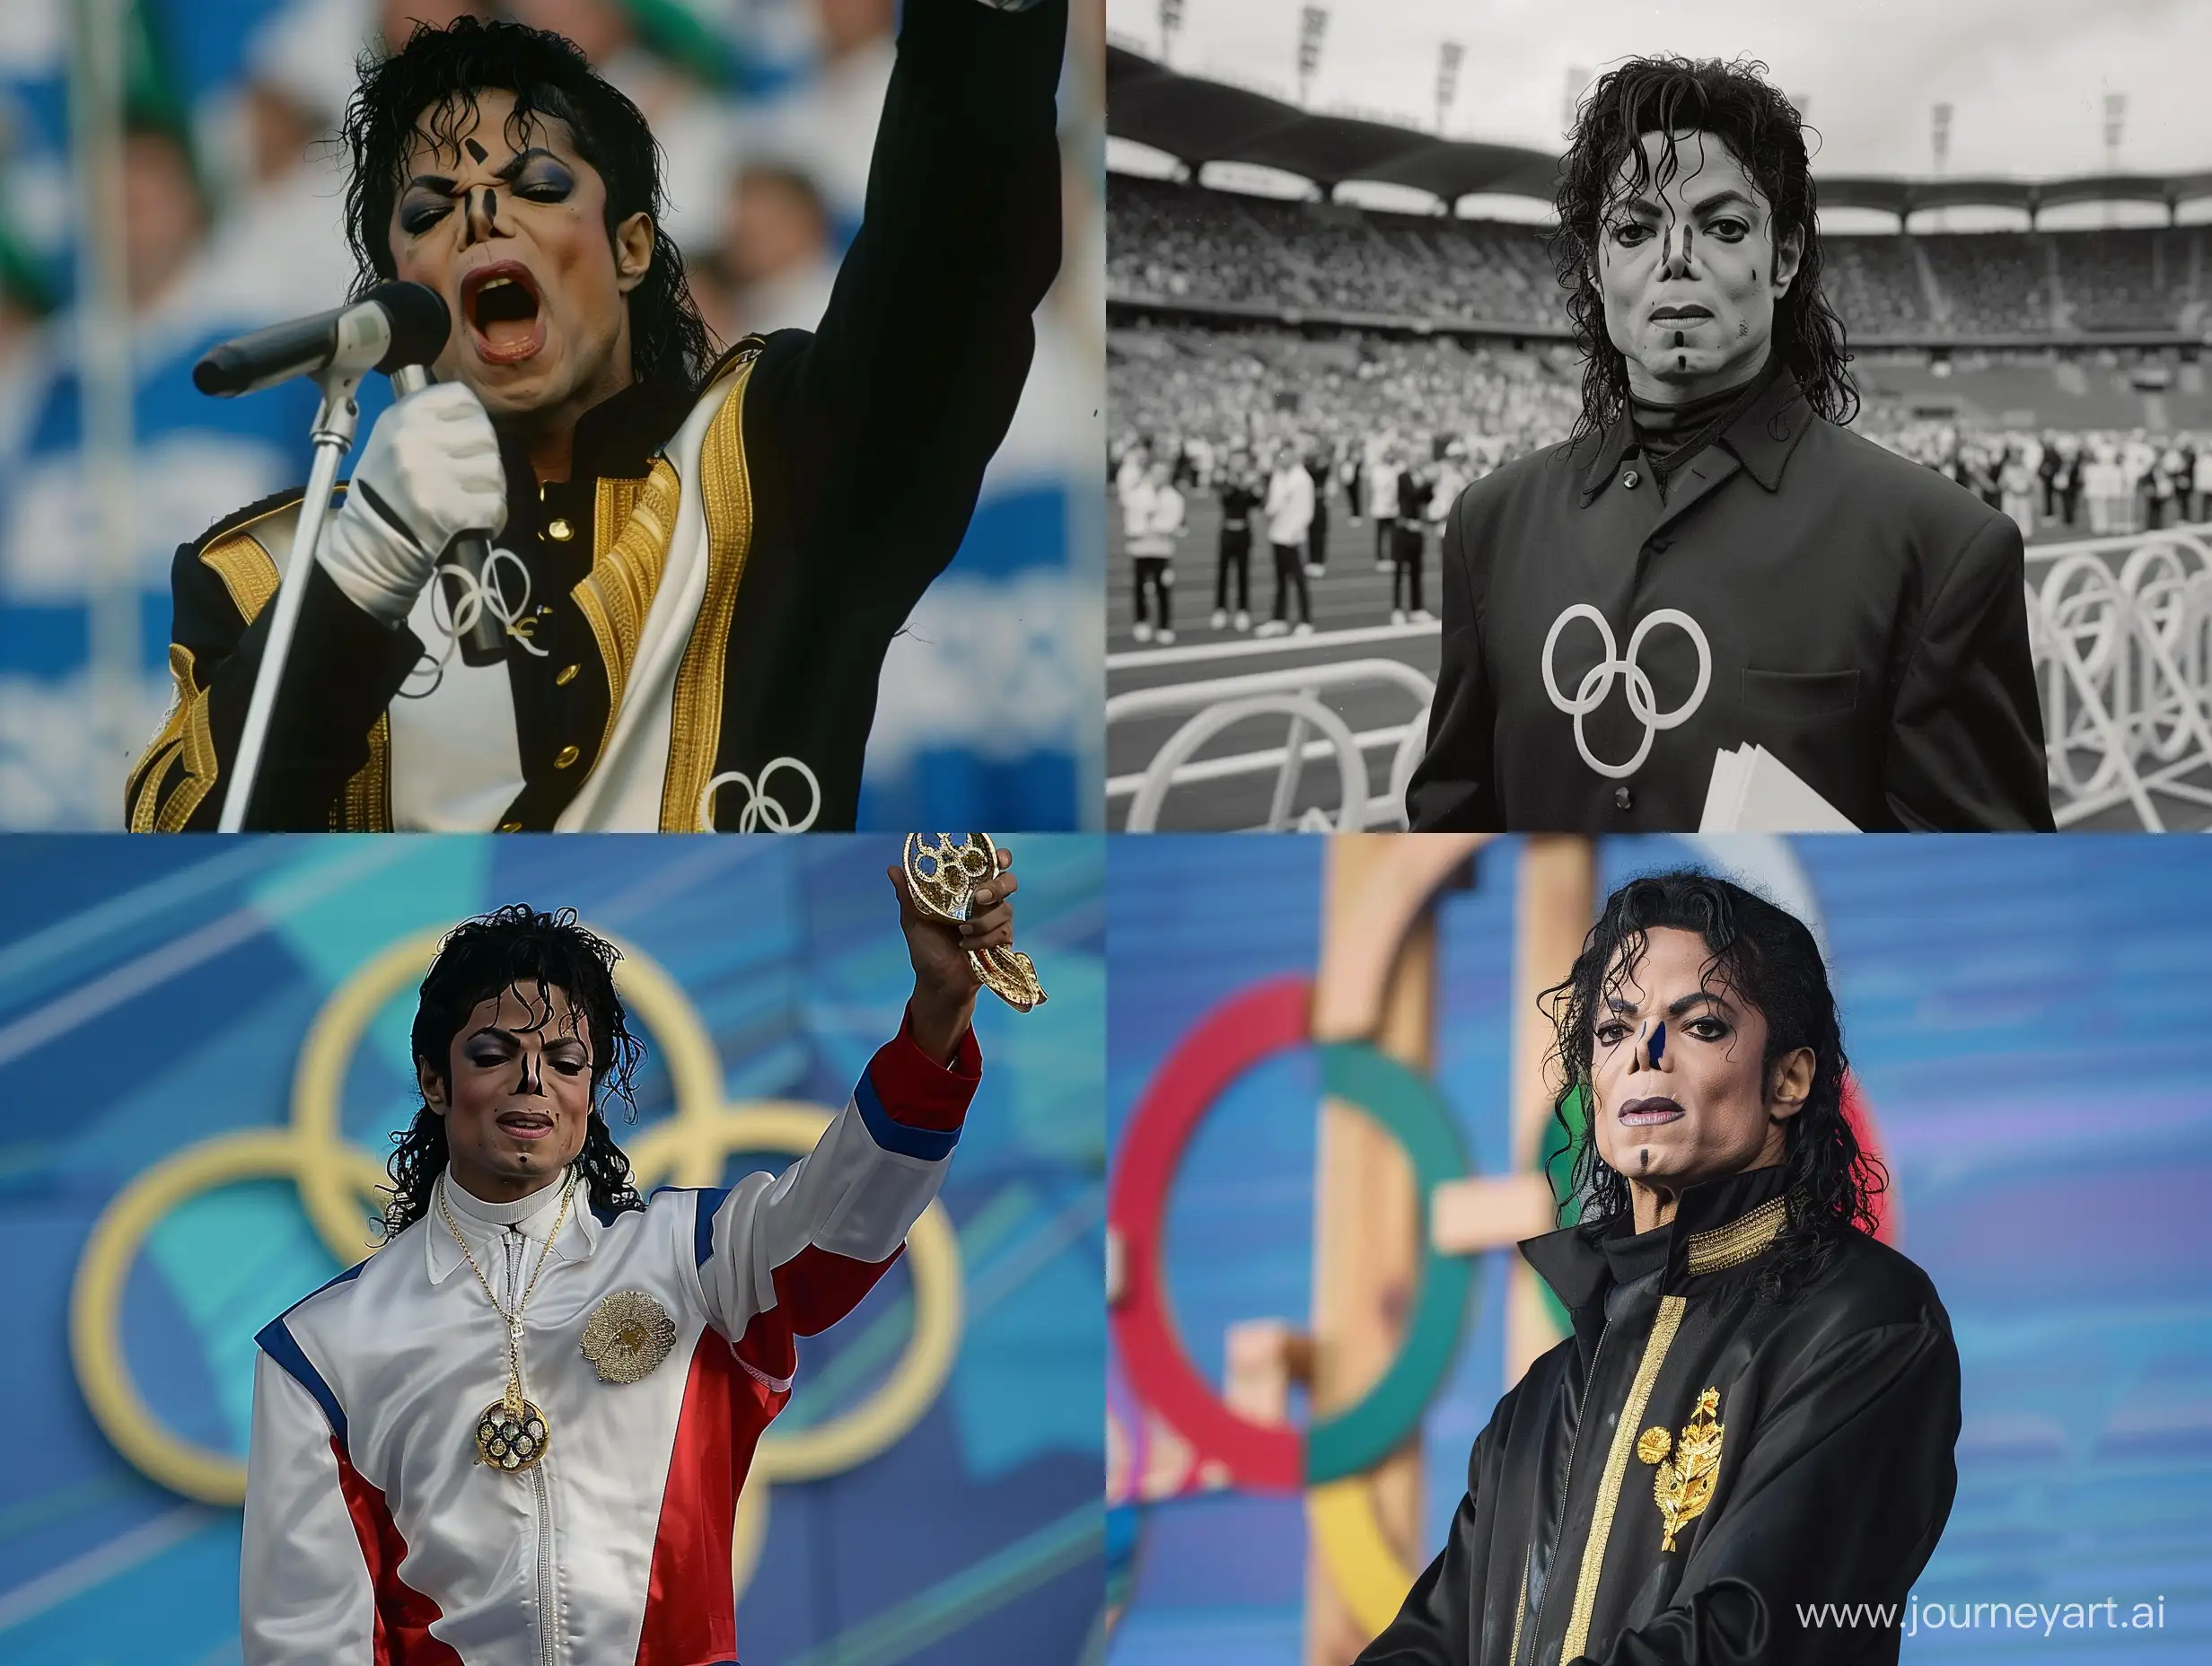 Michael Jackson declaring the olympic games open